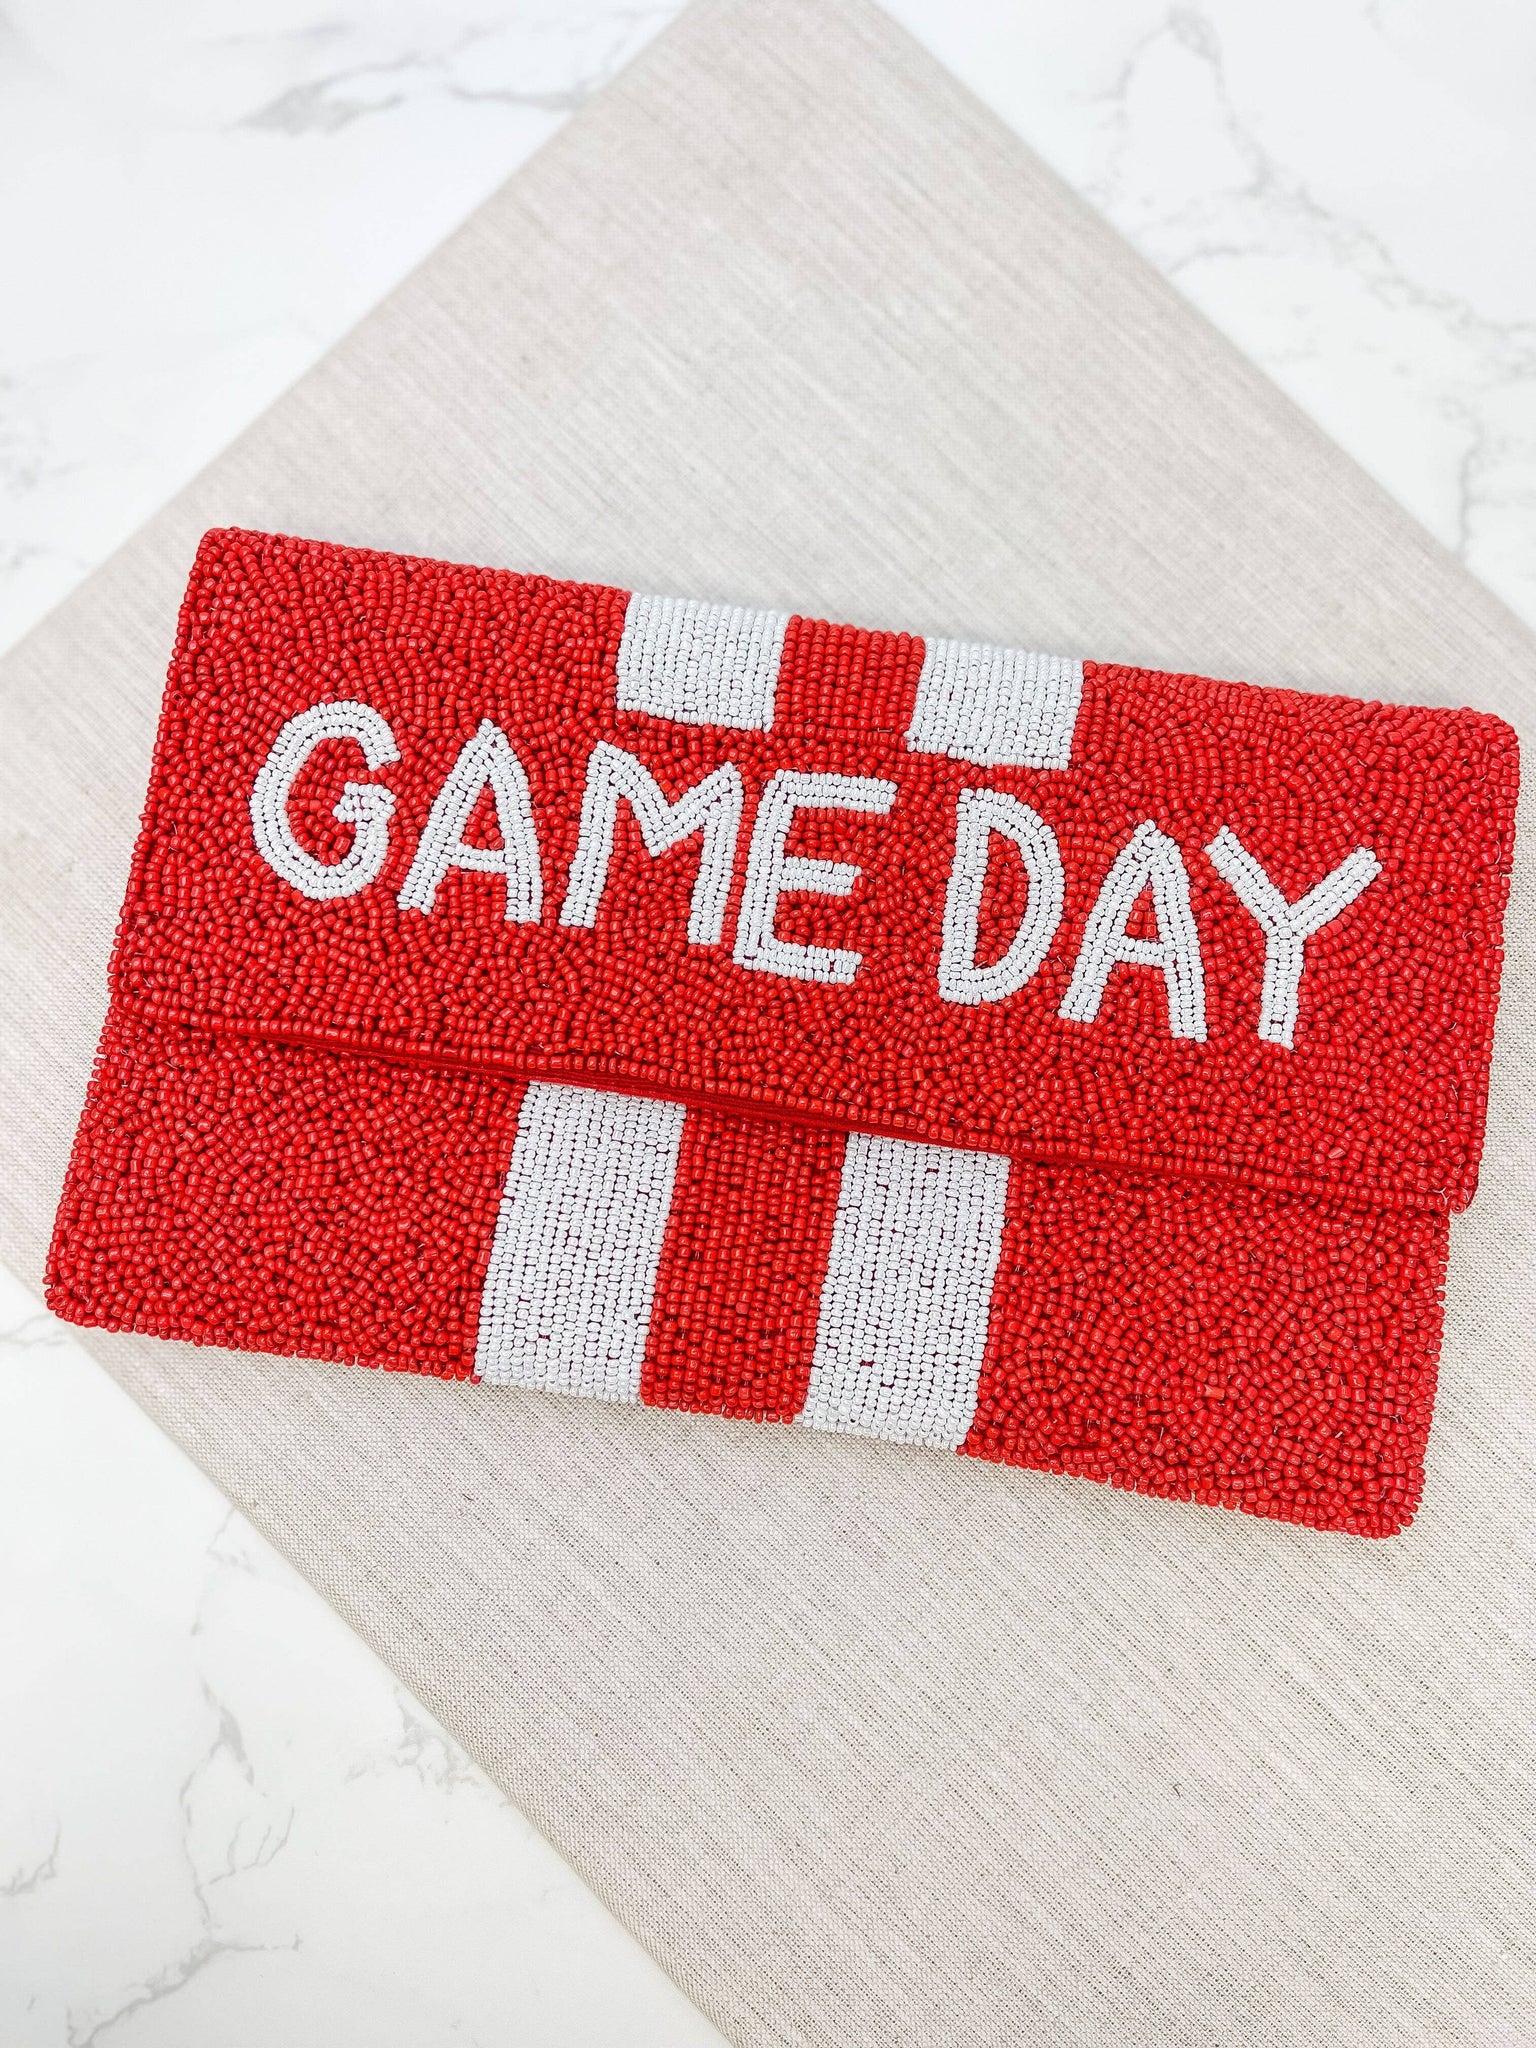 *'Game Day' Beaded Clutch & Convertible Crossbody